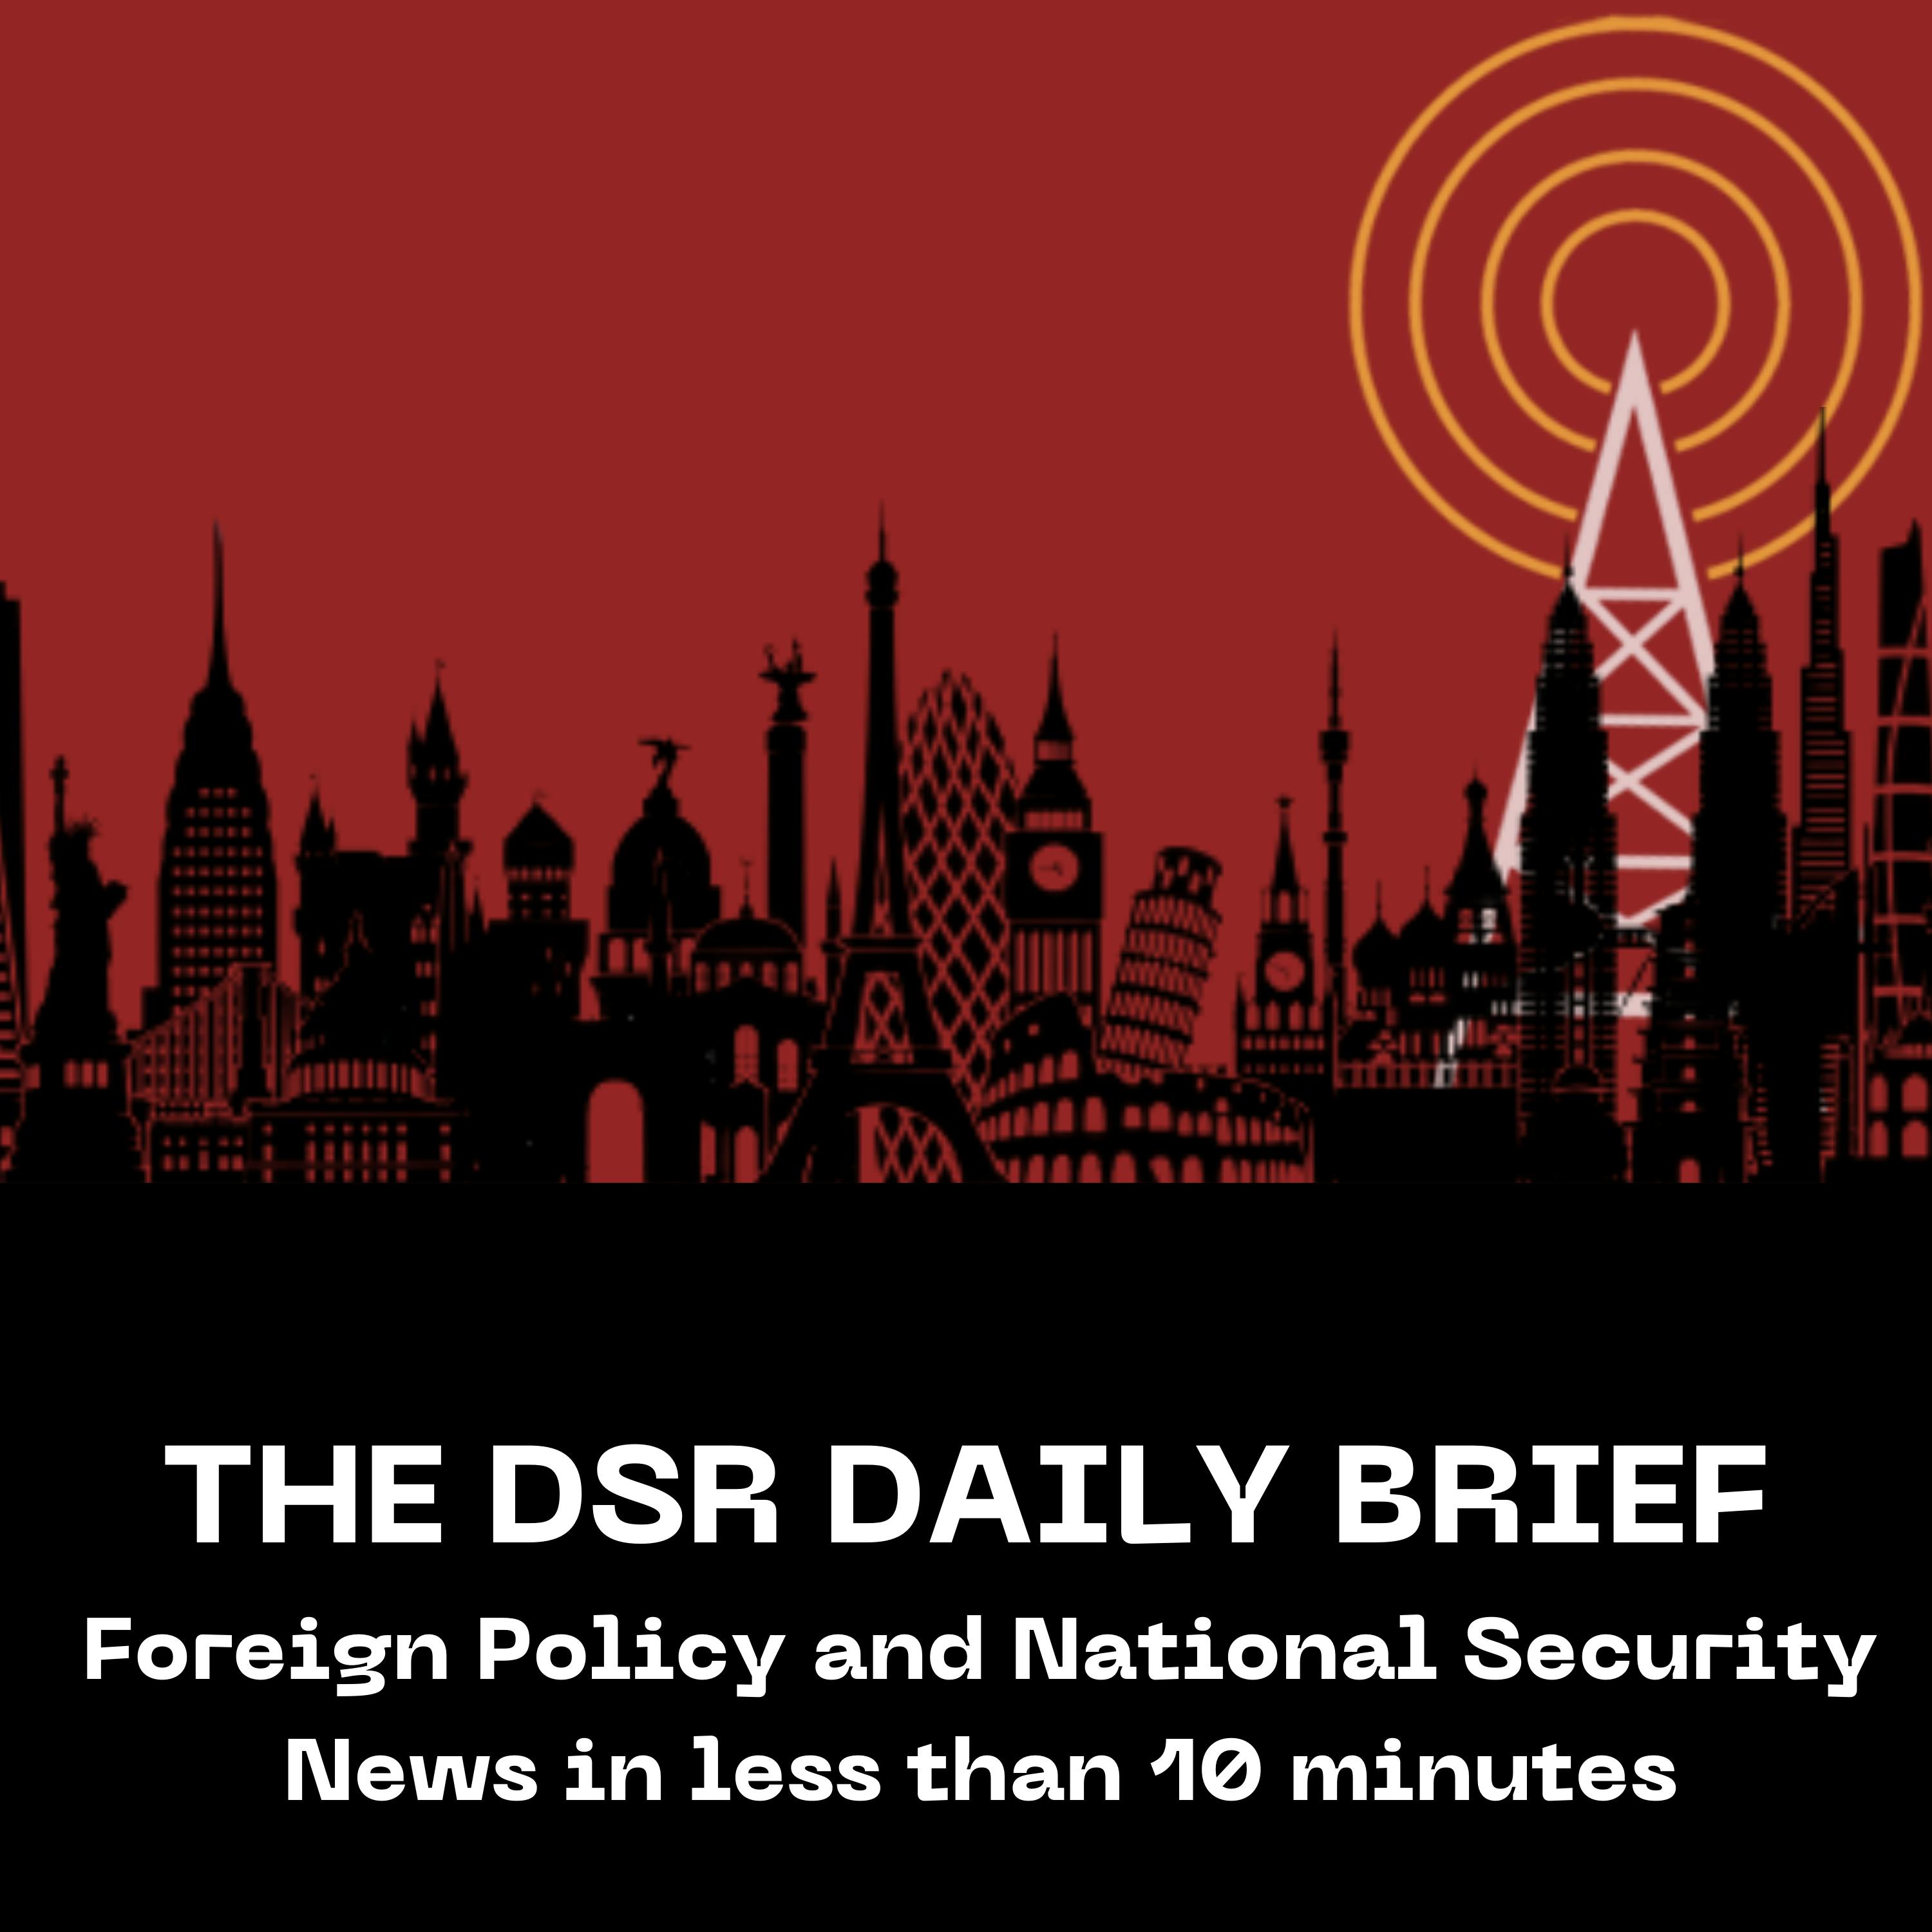 The DSR Daily for May 20: President Raisi Dies in Helicopter Crash, ICC Prosecutor Requests Warrant for Netanyahu